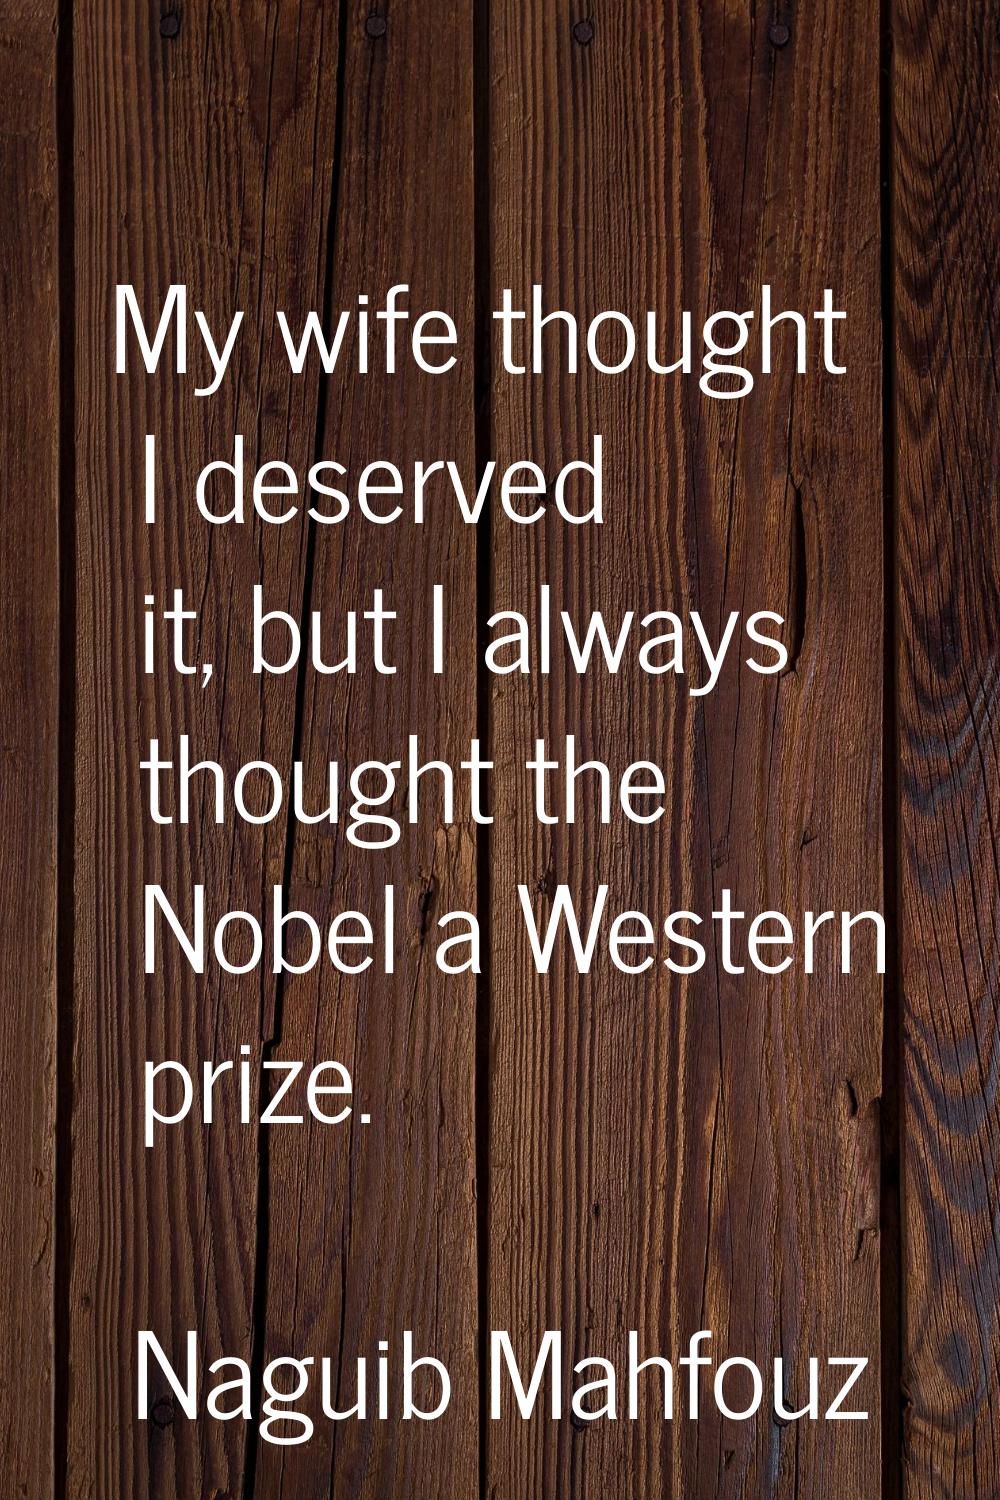 My wife thought I deserved it, but I always thought the Nobel a Western prize.